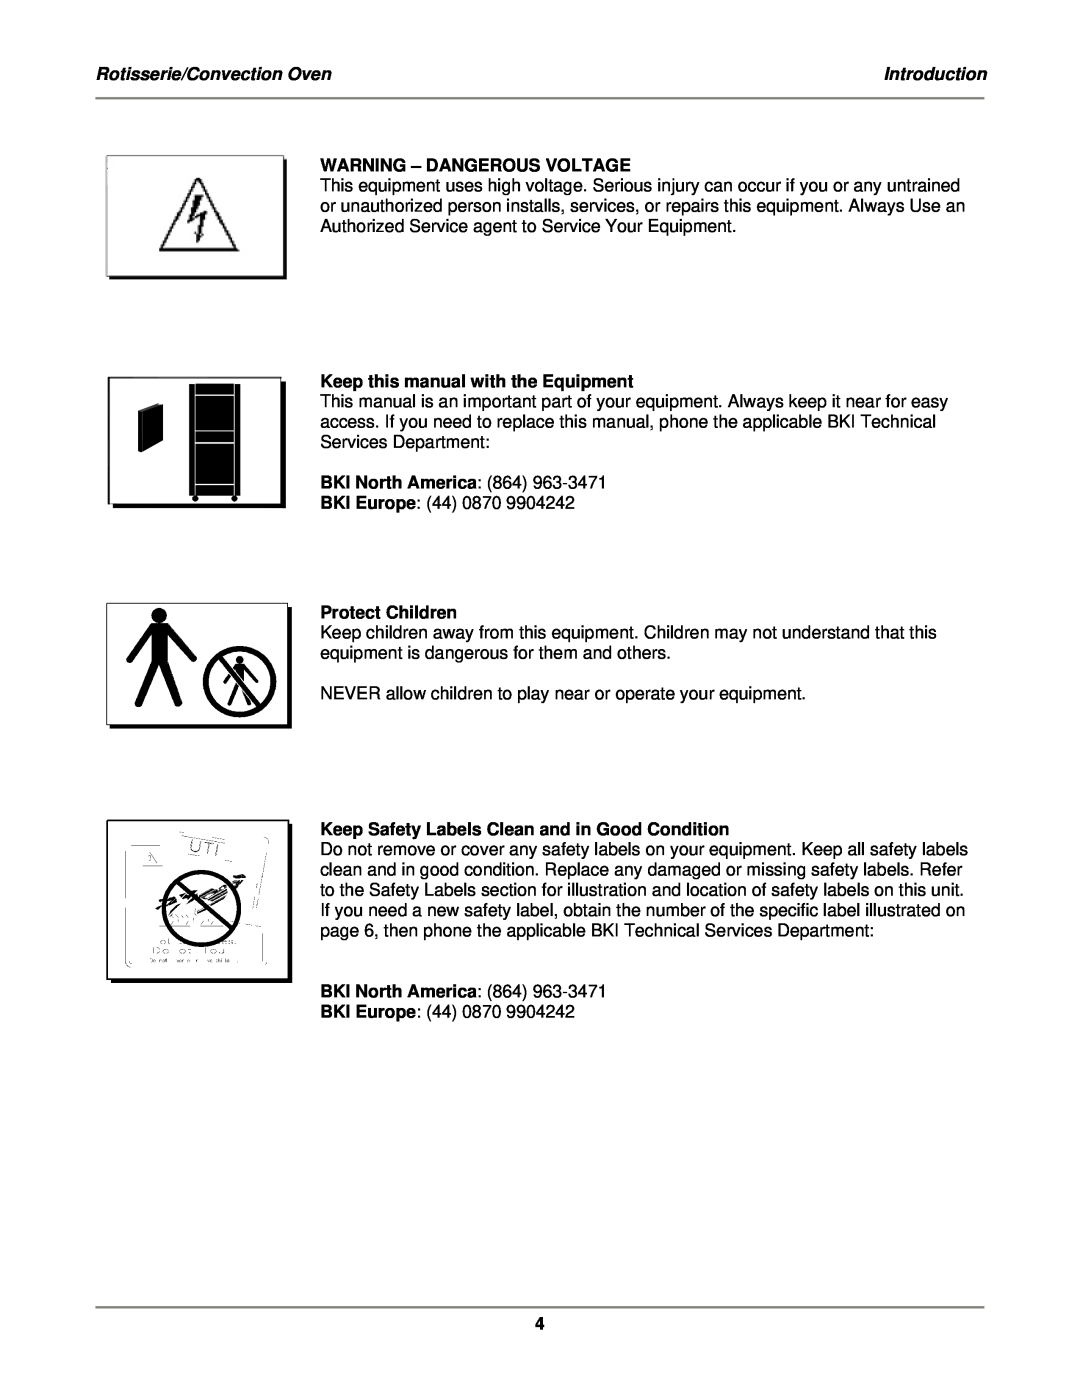 Bakers Pride Oven VGG-CO Warning - Dangerous Voltage, Keep this manual with the Equipment, Protect Children, Introduction 